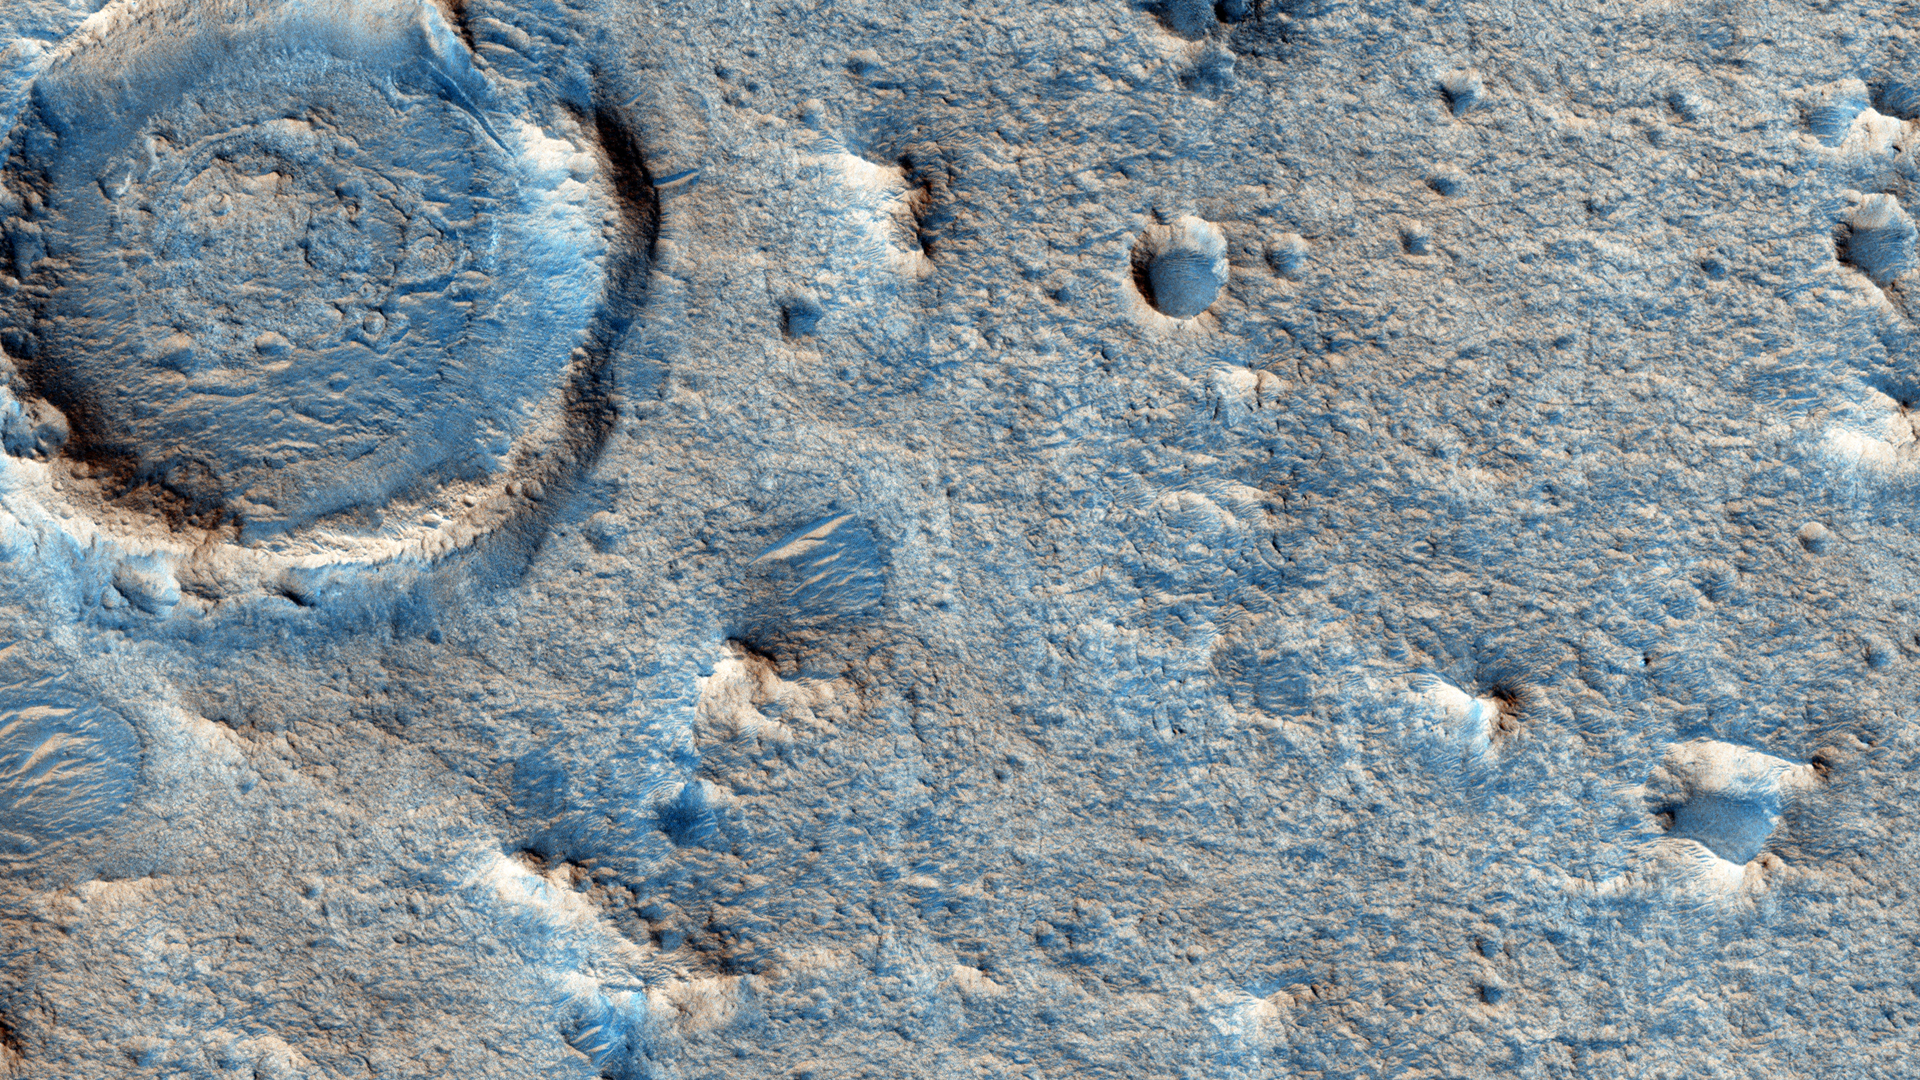 ExoMars' landing site in Oxia Planum is an ancient area that could harbor traces of past life.